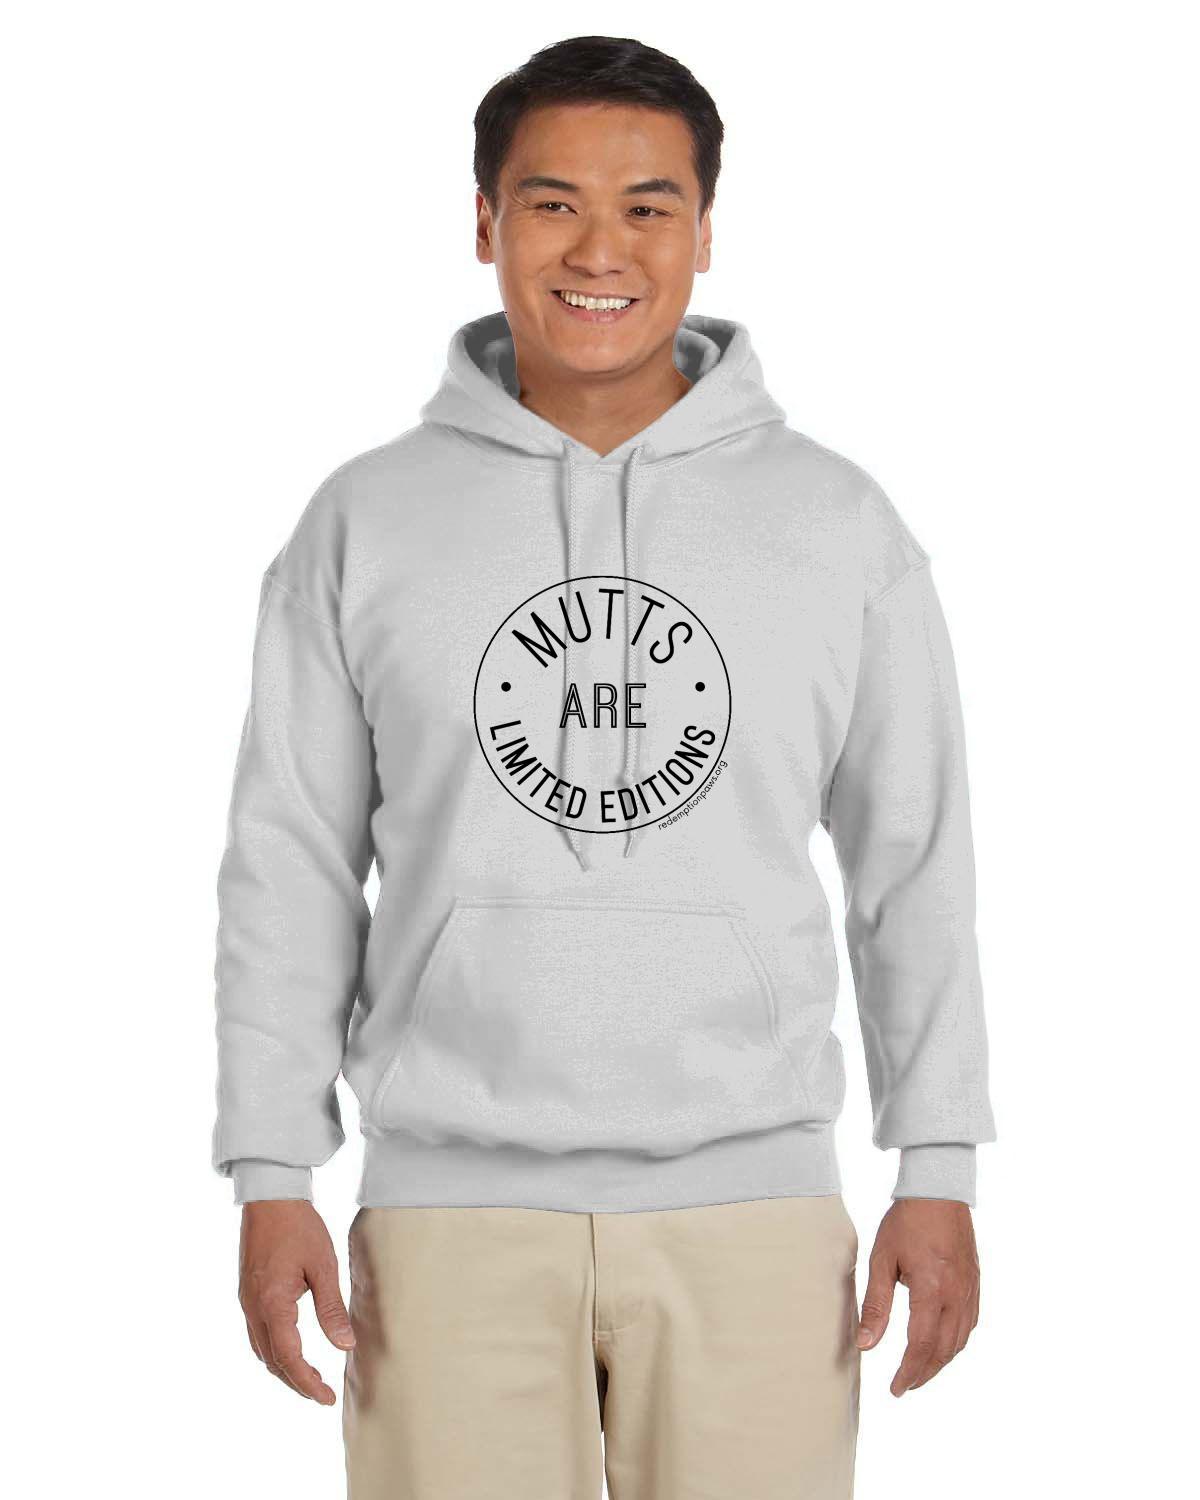 Mutt are Limited Edition Classic Design Hoodie